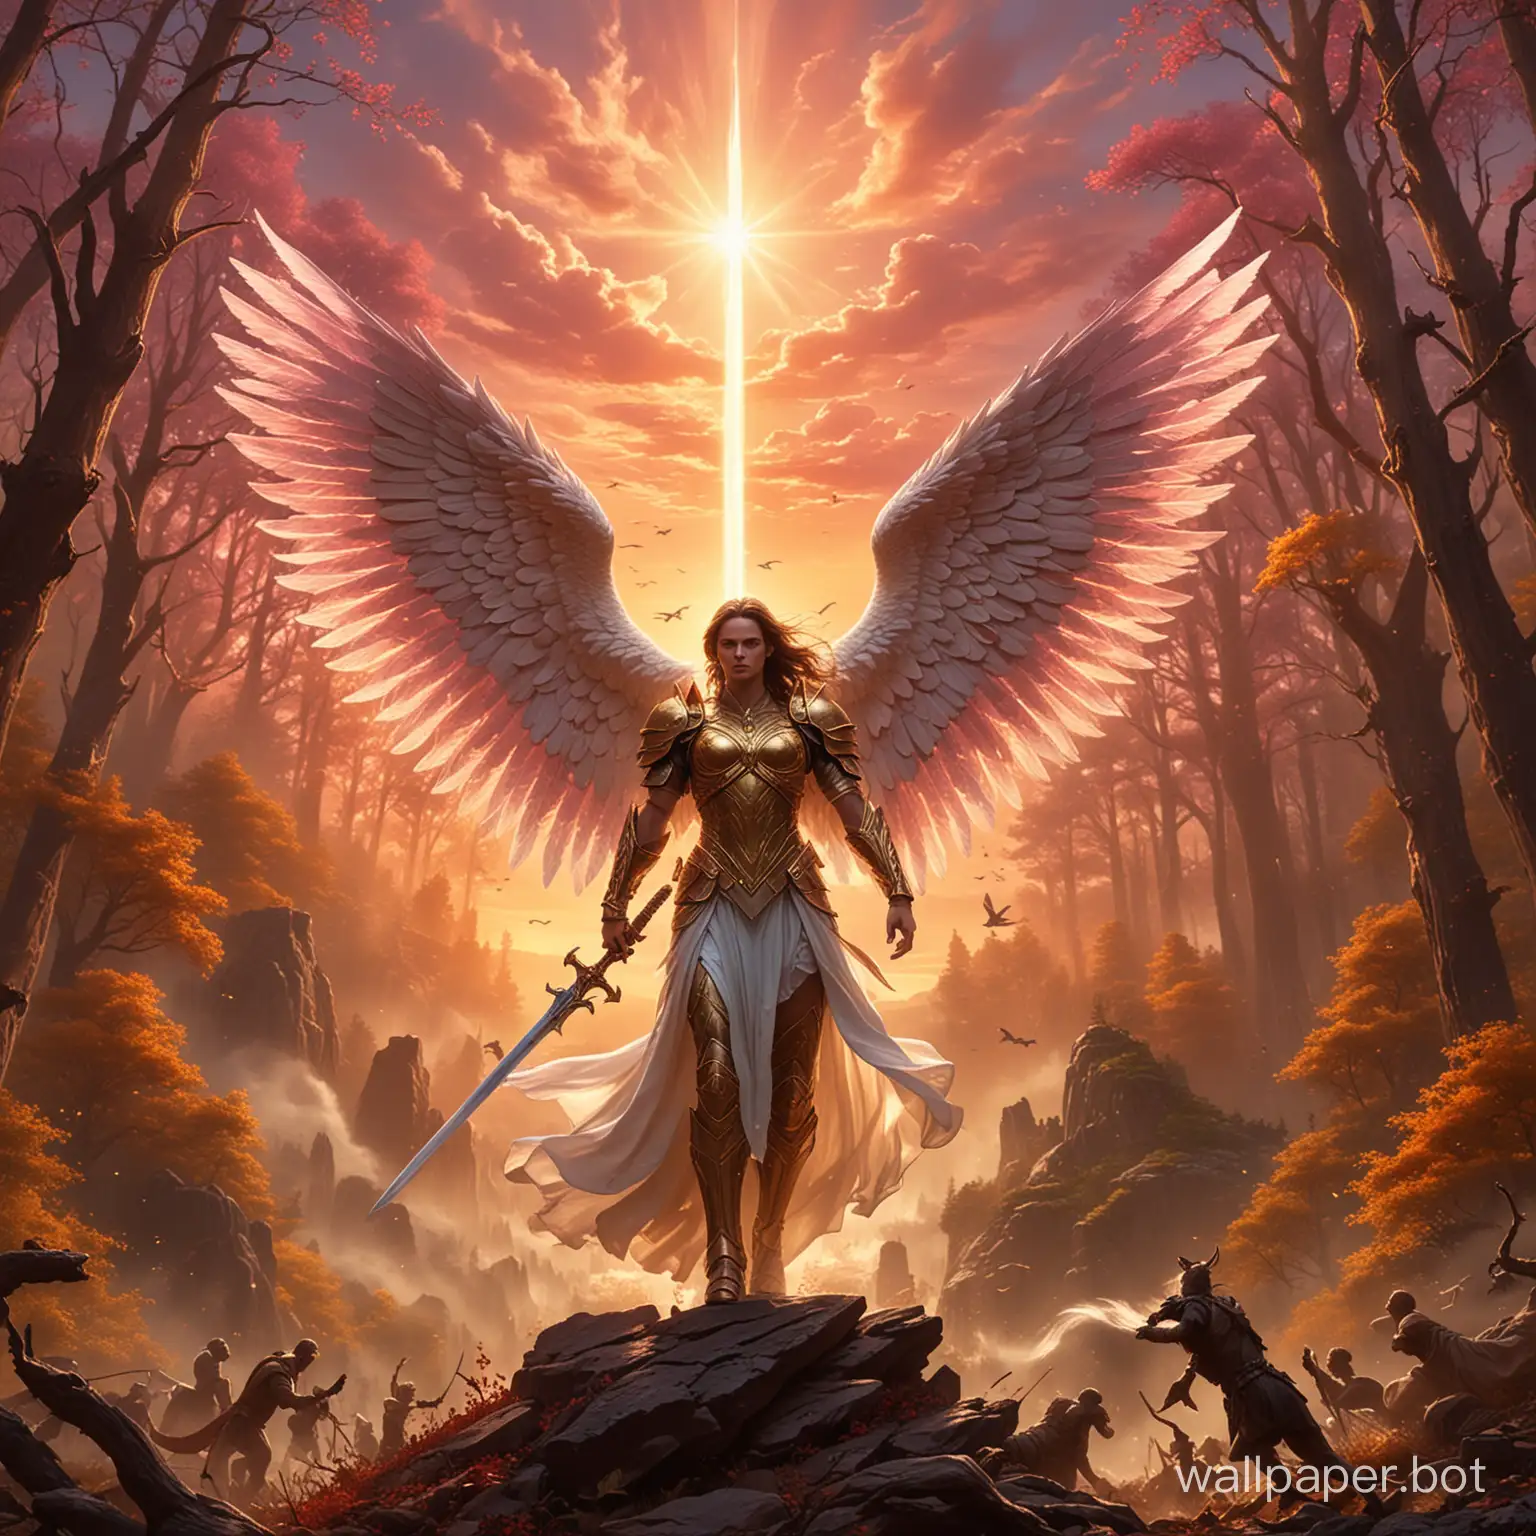 In the last light of a glowing sunset, an epic battle unfolds in the fantastic landscape. On a mountaintop, surrounded by a wonderful forest of colorful trees and mysterious creatures, stand an angel and a demon, locked in an intense battle.

The angel shines in the fading light, clad in armor of brilliant gold and white silk, with wings that bear the mark of divine power. Her sword glitters like stars in the twilight, and her eyes burn with a passion for justice and protection.

The demon, on the other hand, is a terrifying creature, with its body covered in towering scales and eyes blazing with malice. His claws cut through the air with menacing intensity, but despite his strength, he is overwhelmed by the angel's divine power.

Between the two warriors, the energy of the fight flows like a wild, dancing light. The wind howls and whips with force, as the earth shakes under the weight of their struggle. Around them you see fantastic creatures watching, some with horror, others with admiration.

On the horizon, the sunset paints the sky with a kaleidoscope of colors, as if nature itself is witnessing this decisive moment. The gold and pink tones that paint the sky cast a glowing shimmer over the scene, as if blessing the angel's victory and paving the way for peace and harmony in the wonderful landscape.